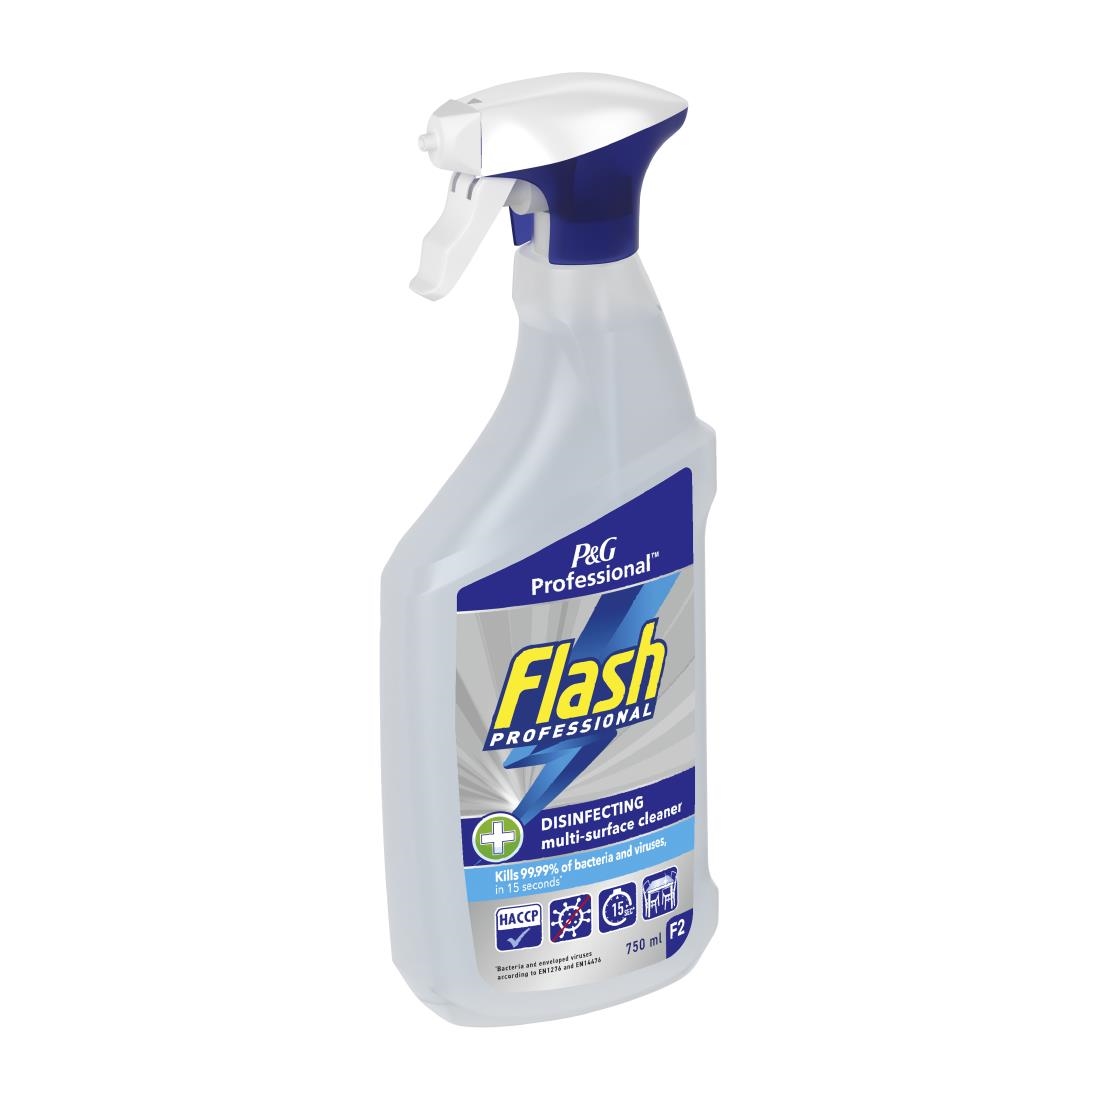 Flash Professional Disinfecting Multi-Surface Cleaning Spray 750ml Pack of 6 (DX566)